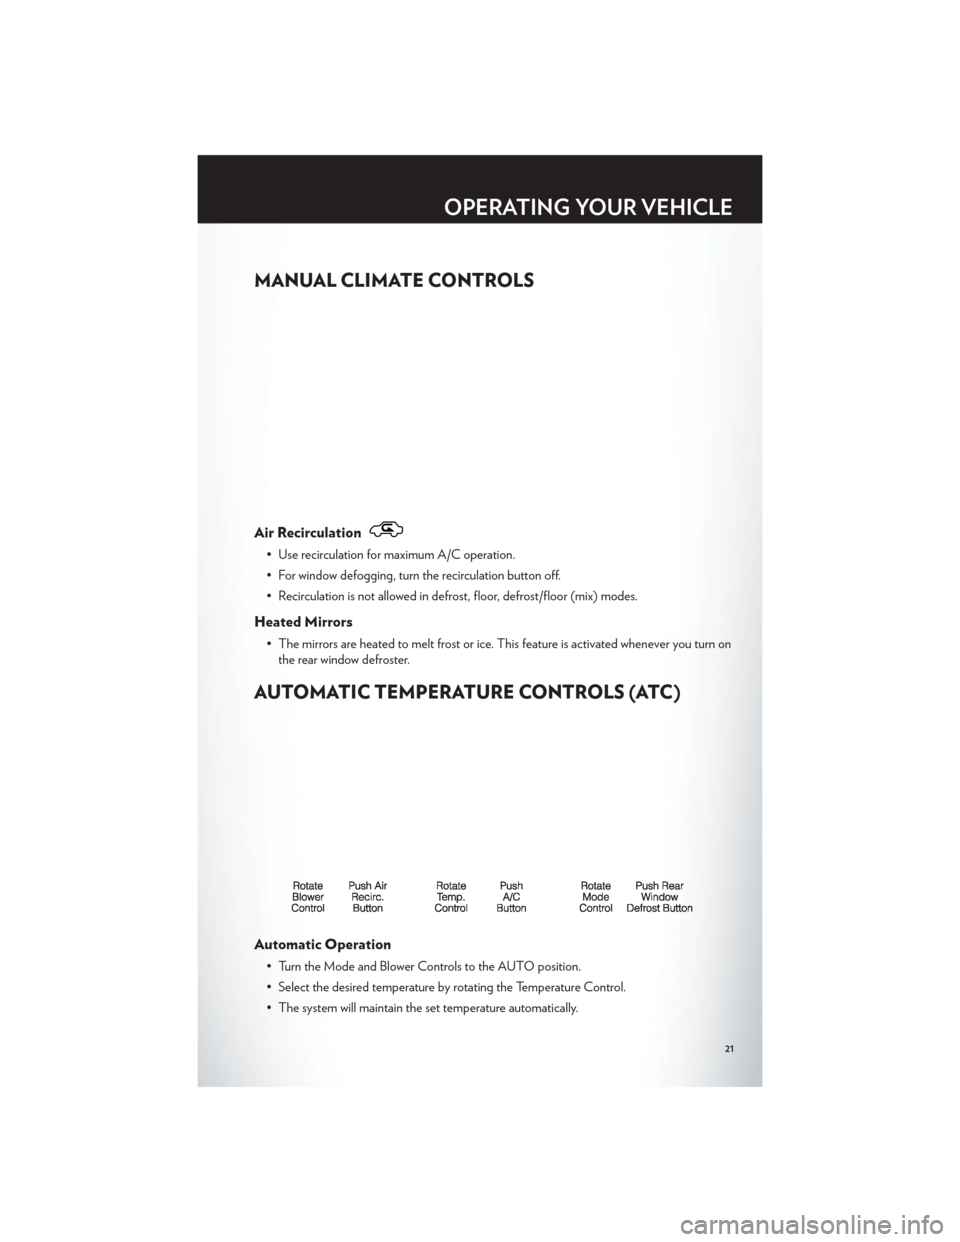 CHRYSLER 200 2012 1.G Owners Manual MANUAL CLIMATE CONTROLS
Air Recirculation
• Use recirculation for maximum A/C operation.
• For window defogging, turn the recirculation button off.
• Recirculation is not allowed in defrost, flo